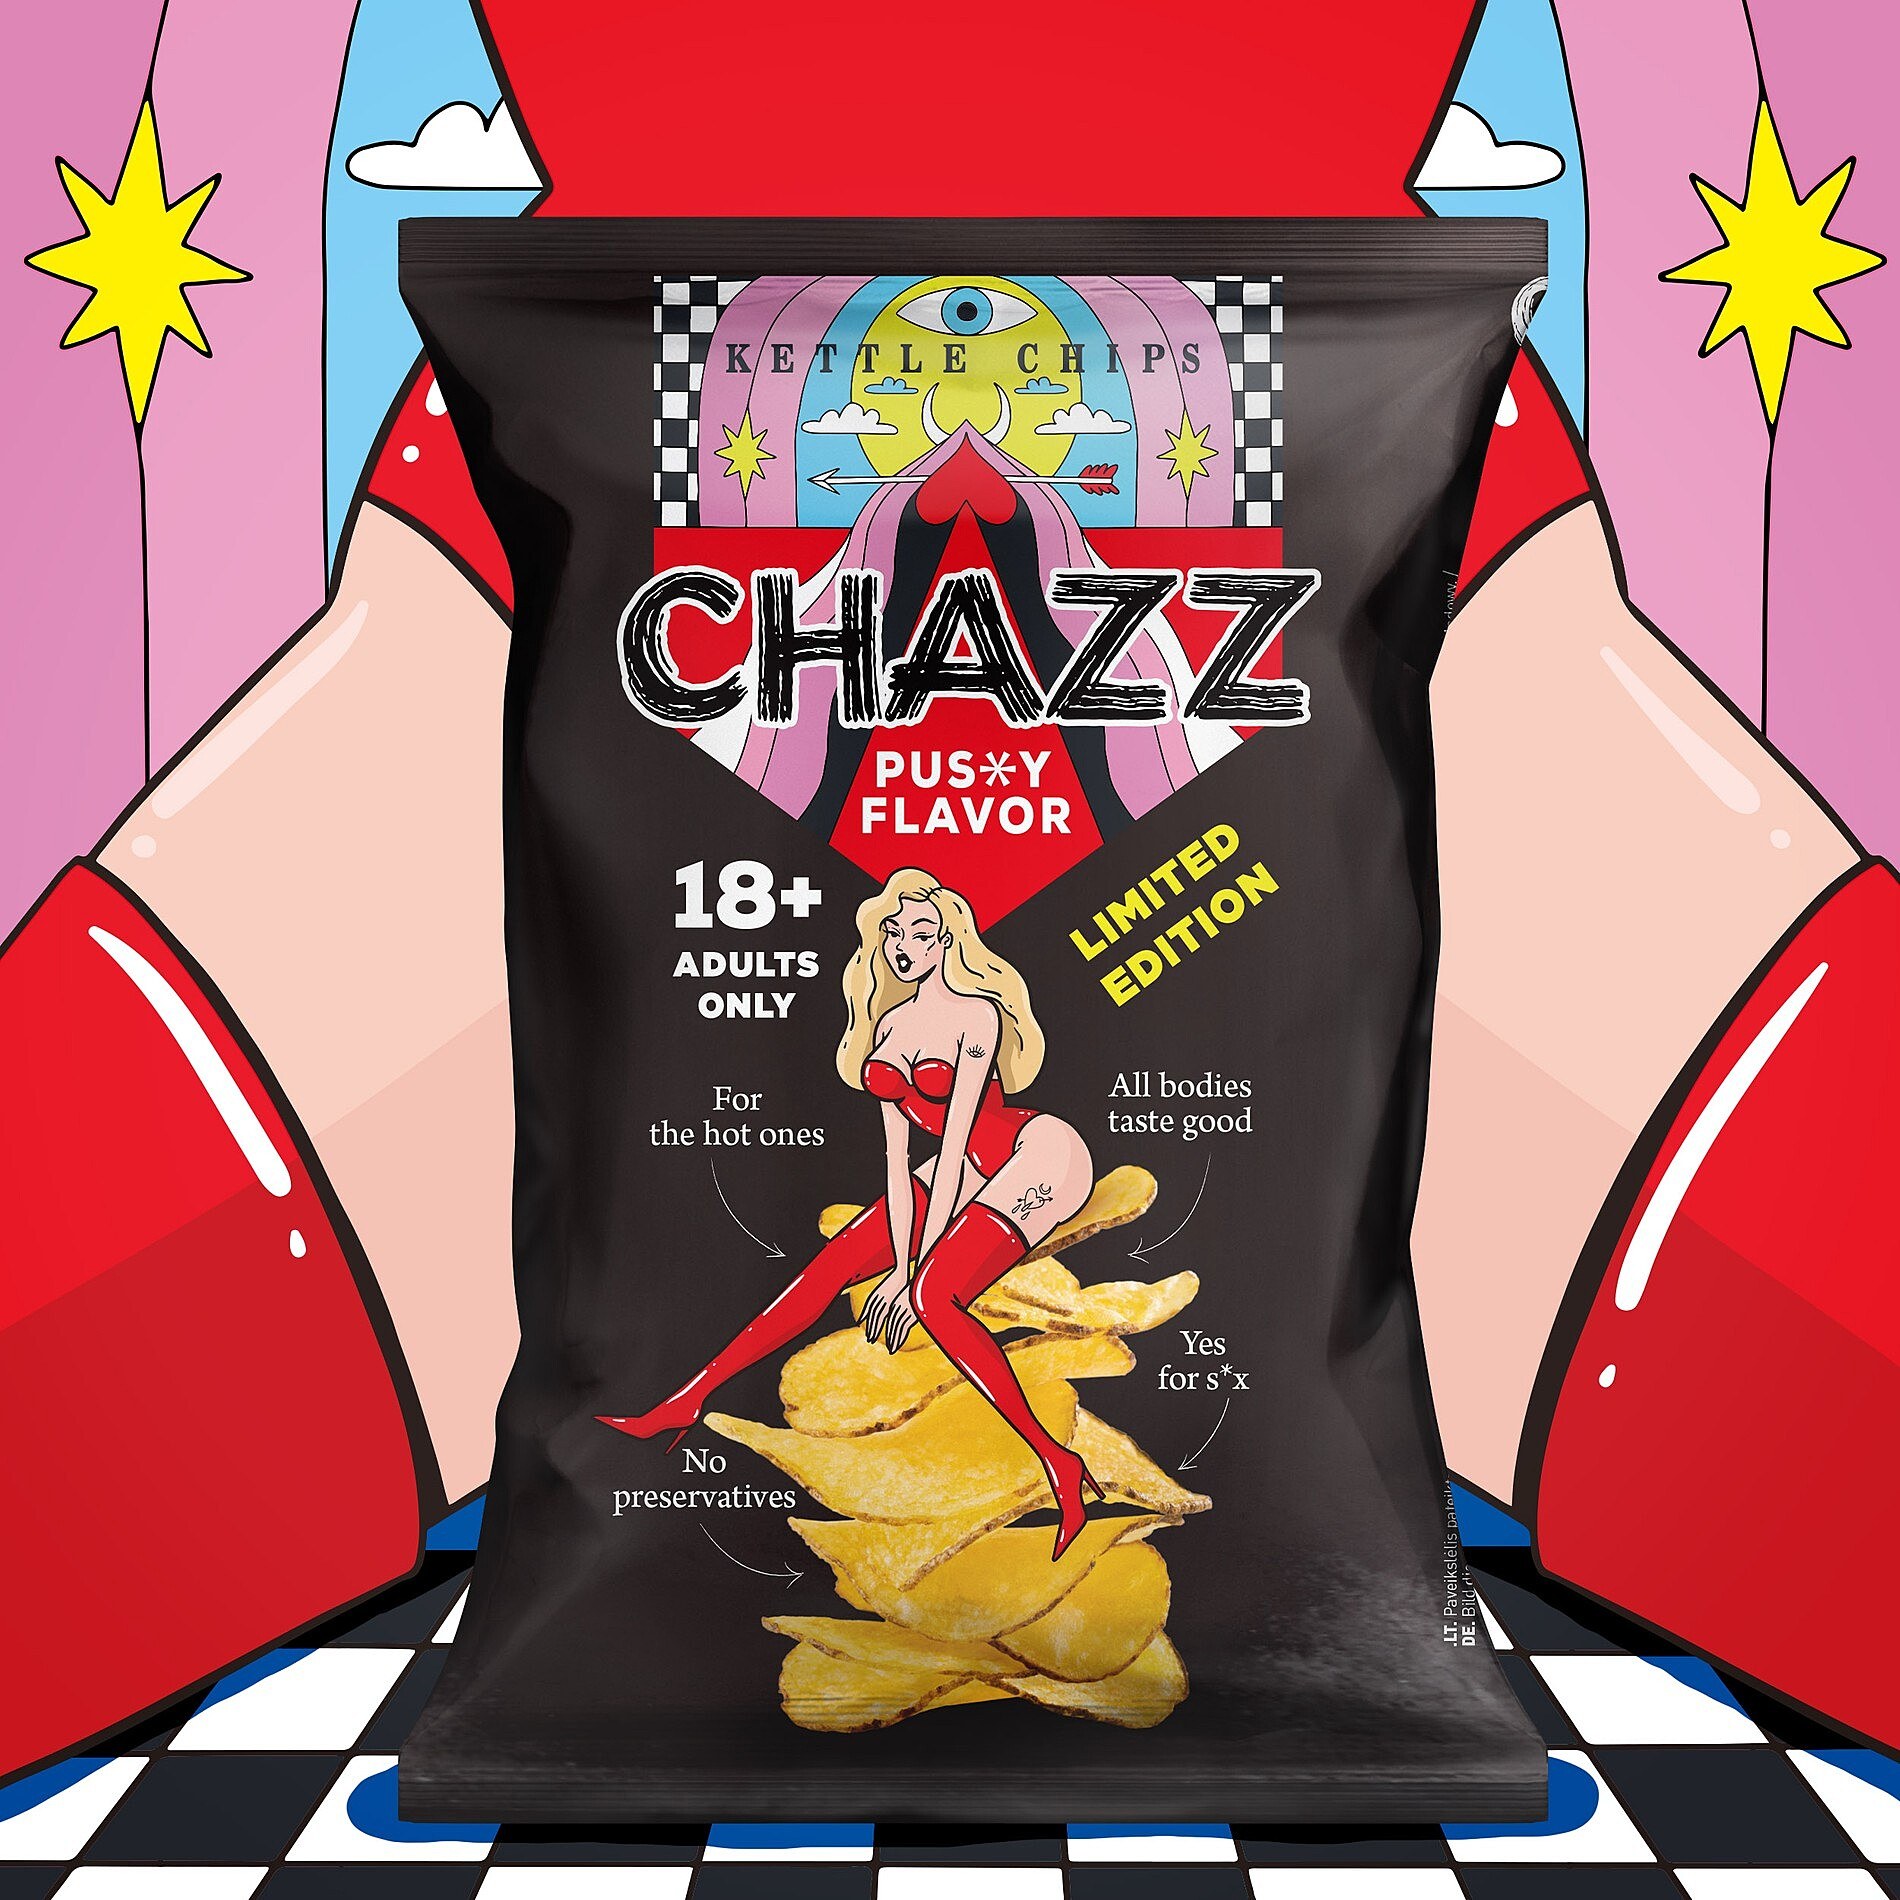 Chazz chips pussy